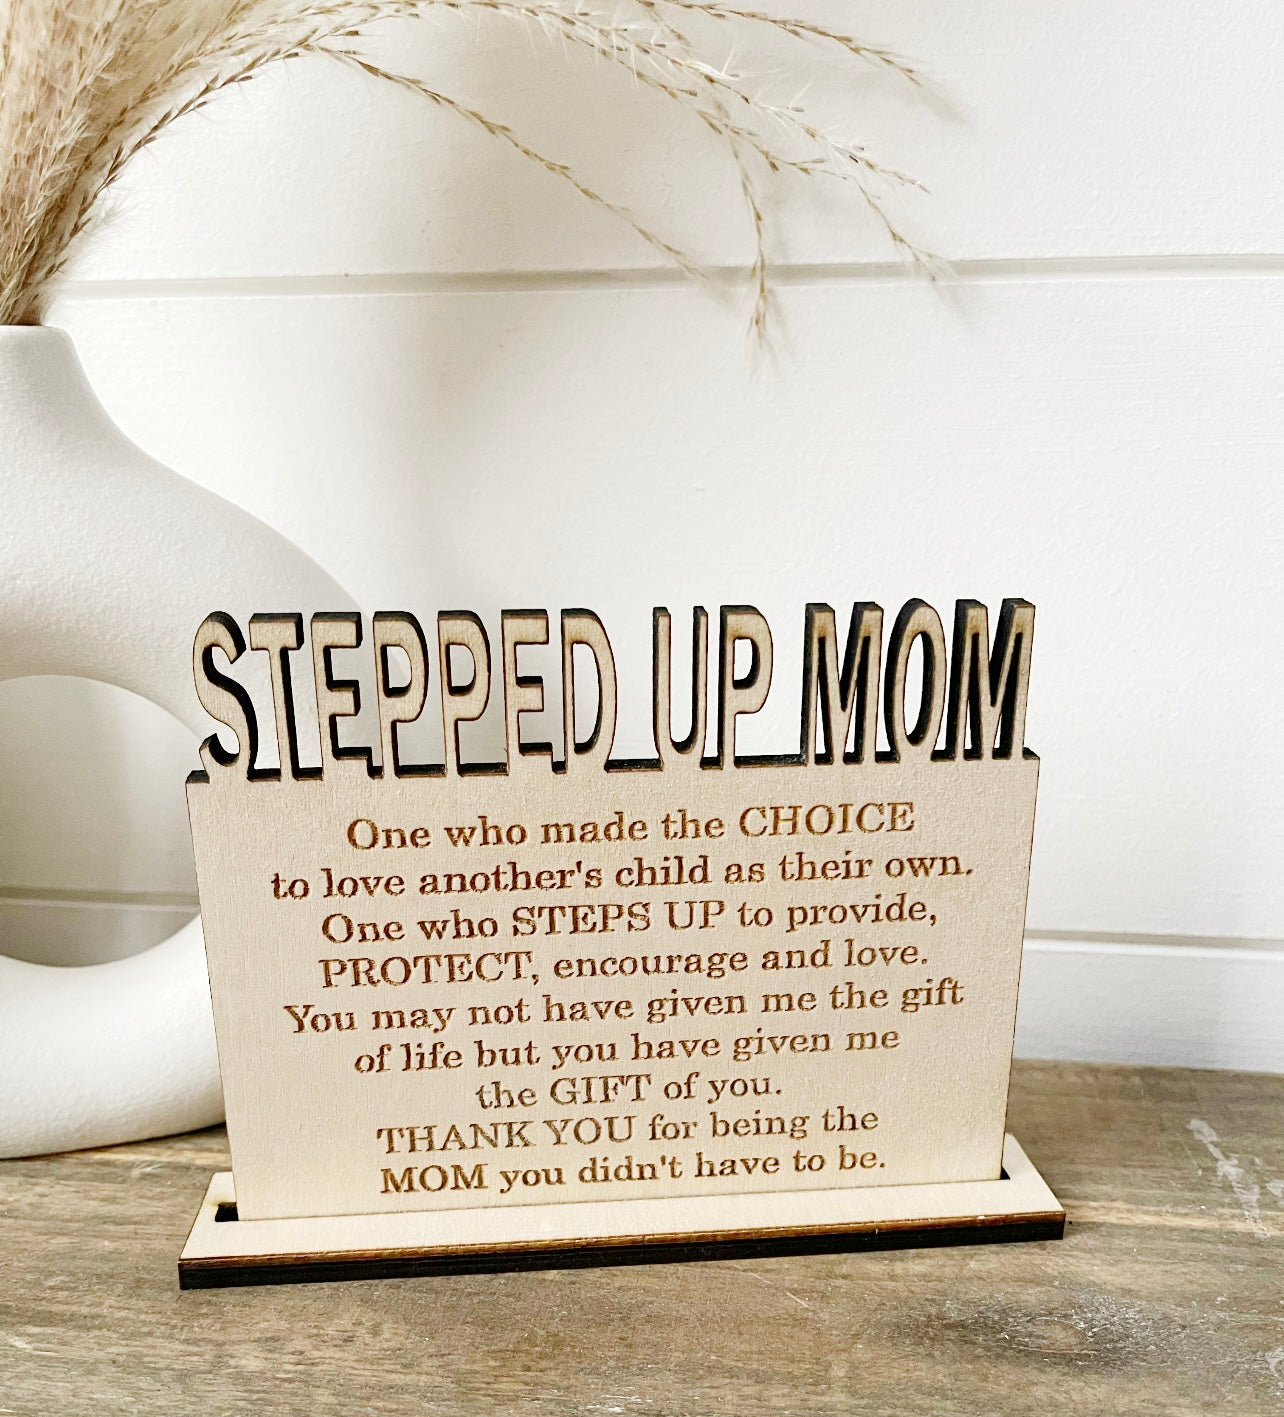 Stepped up mom wooden plaque, wooden stepped up mom plaque